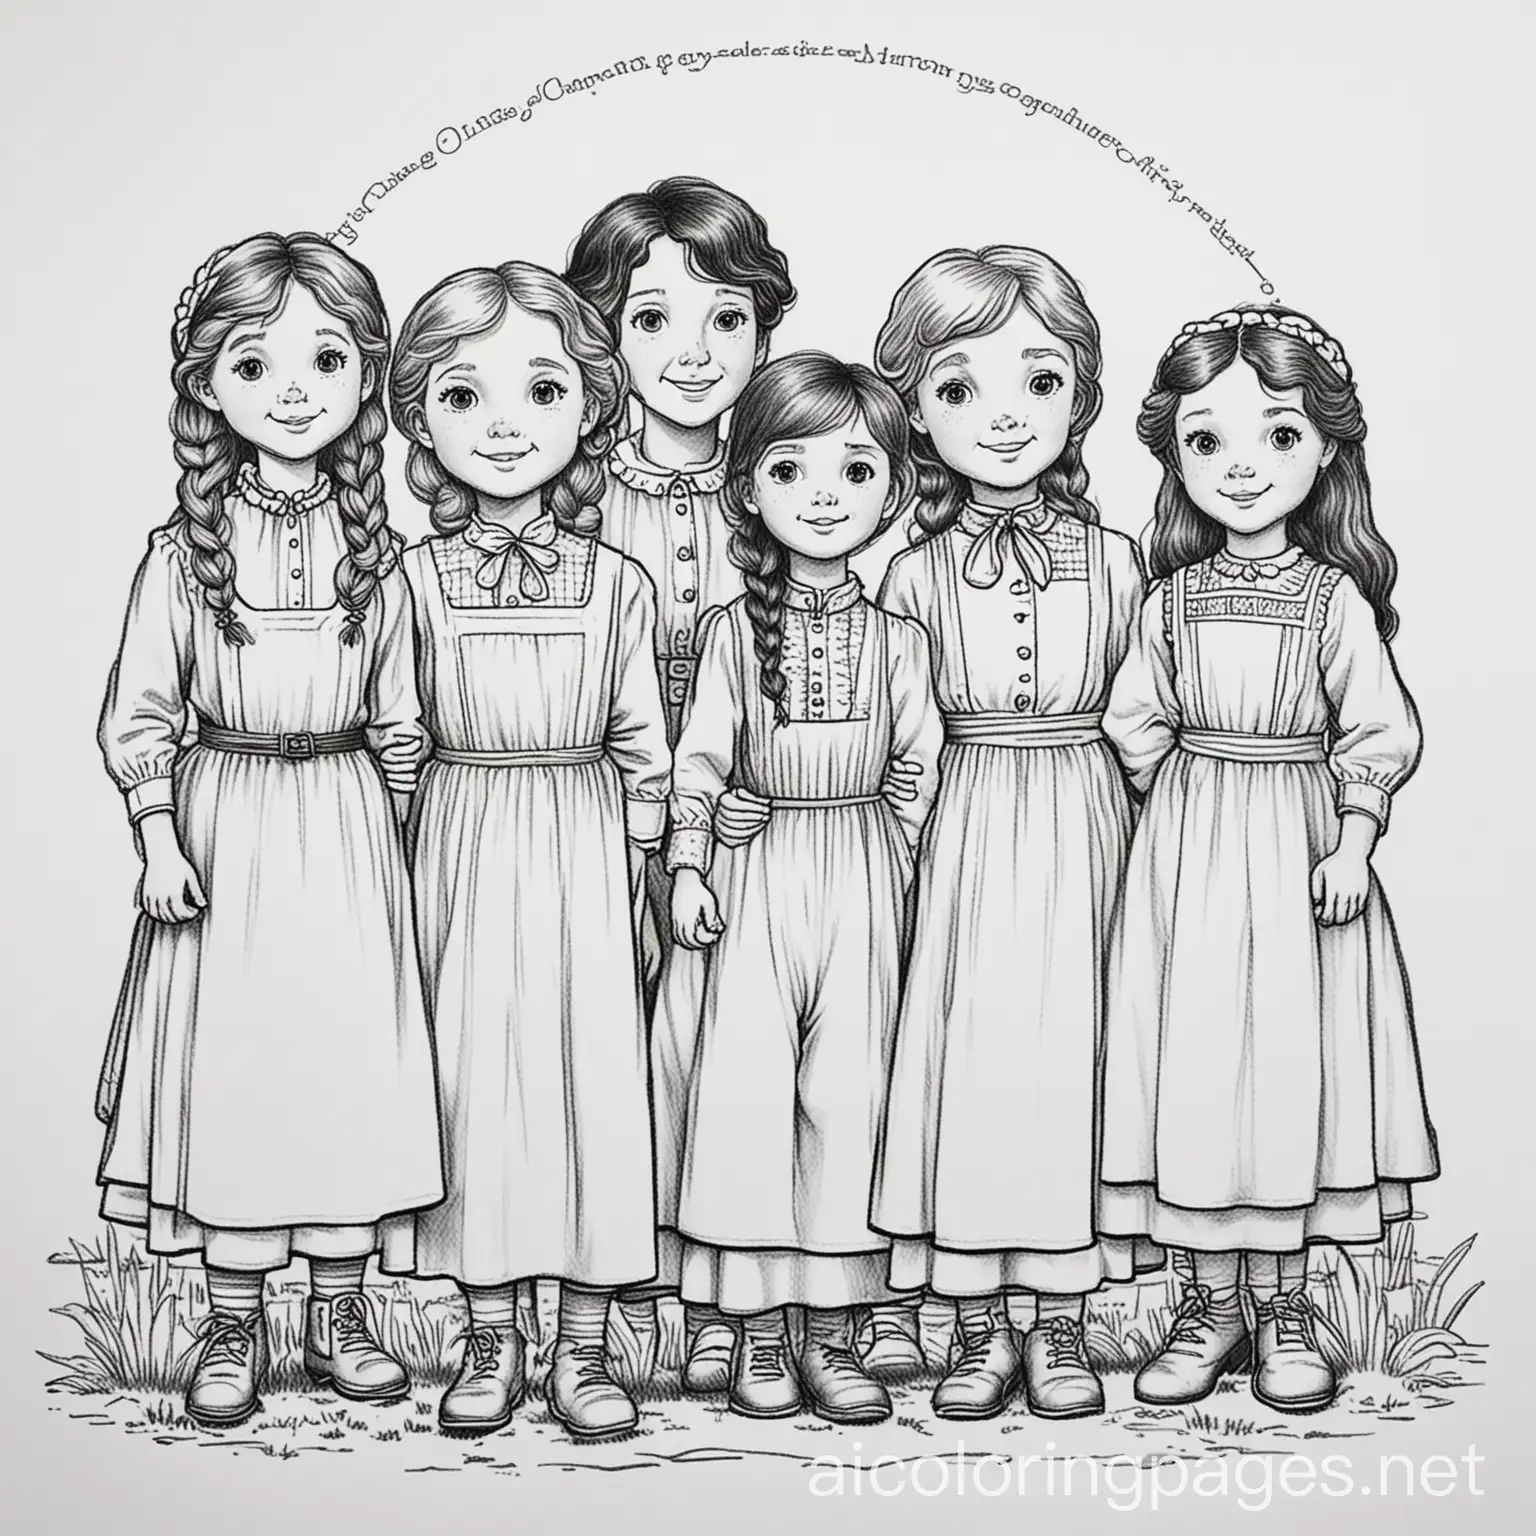 Simple-Black-and-White-Coloring-Page-of-Little-House-on-the-Prairie-Characters